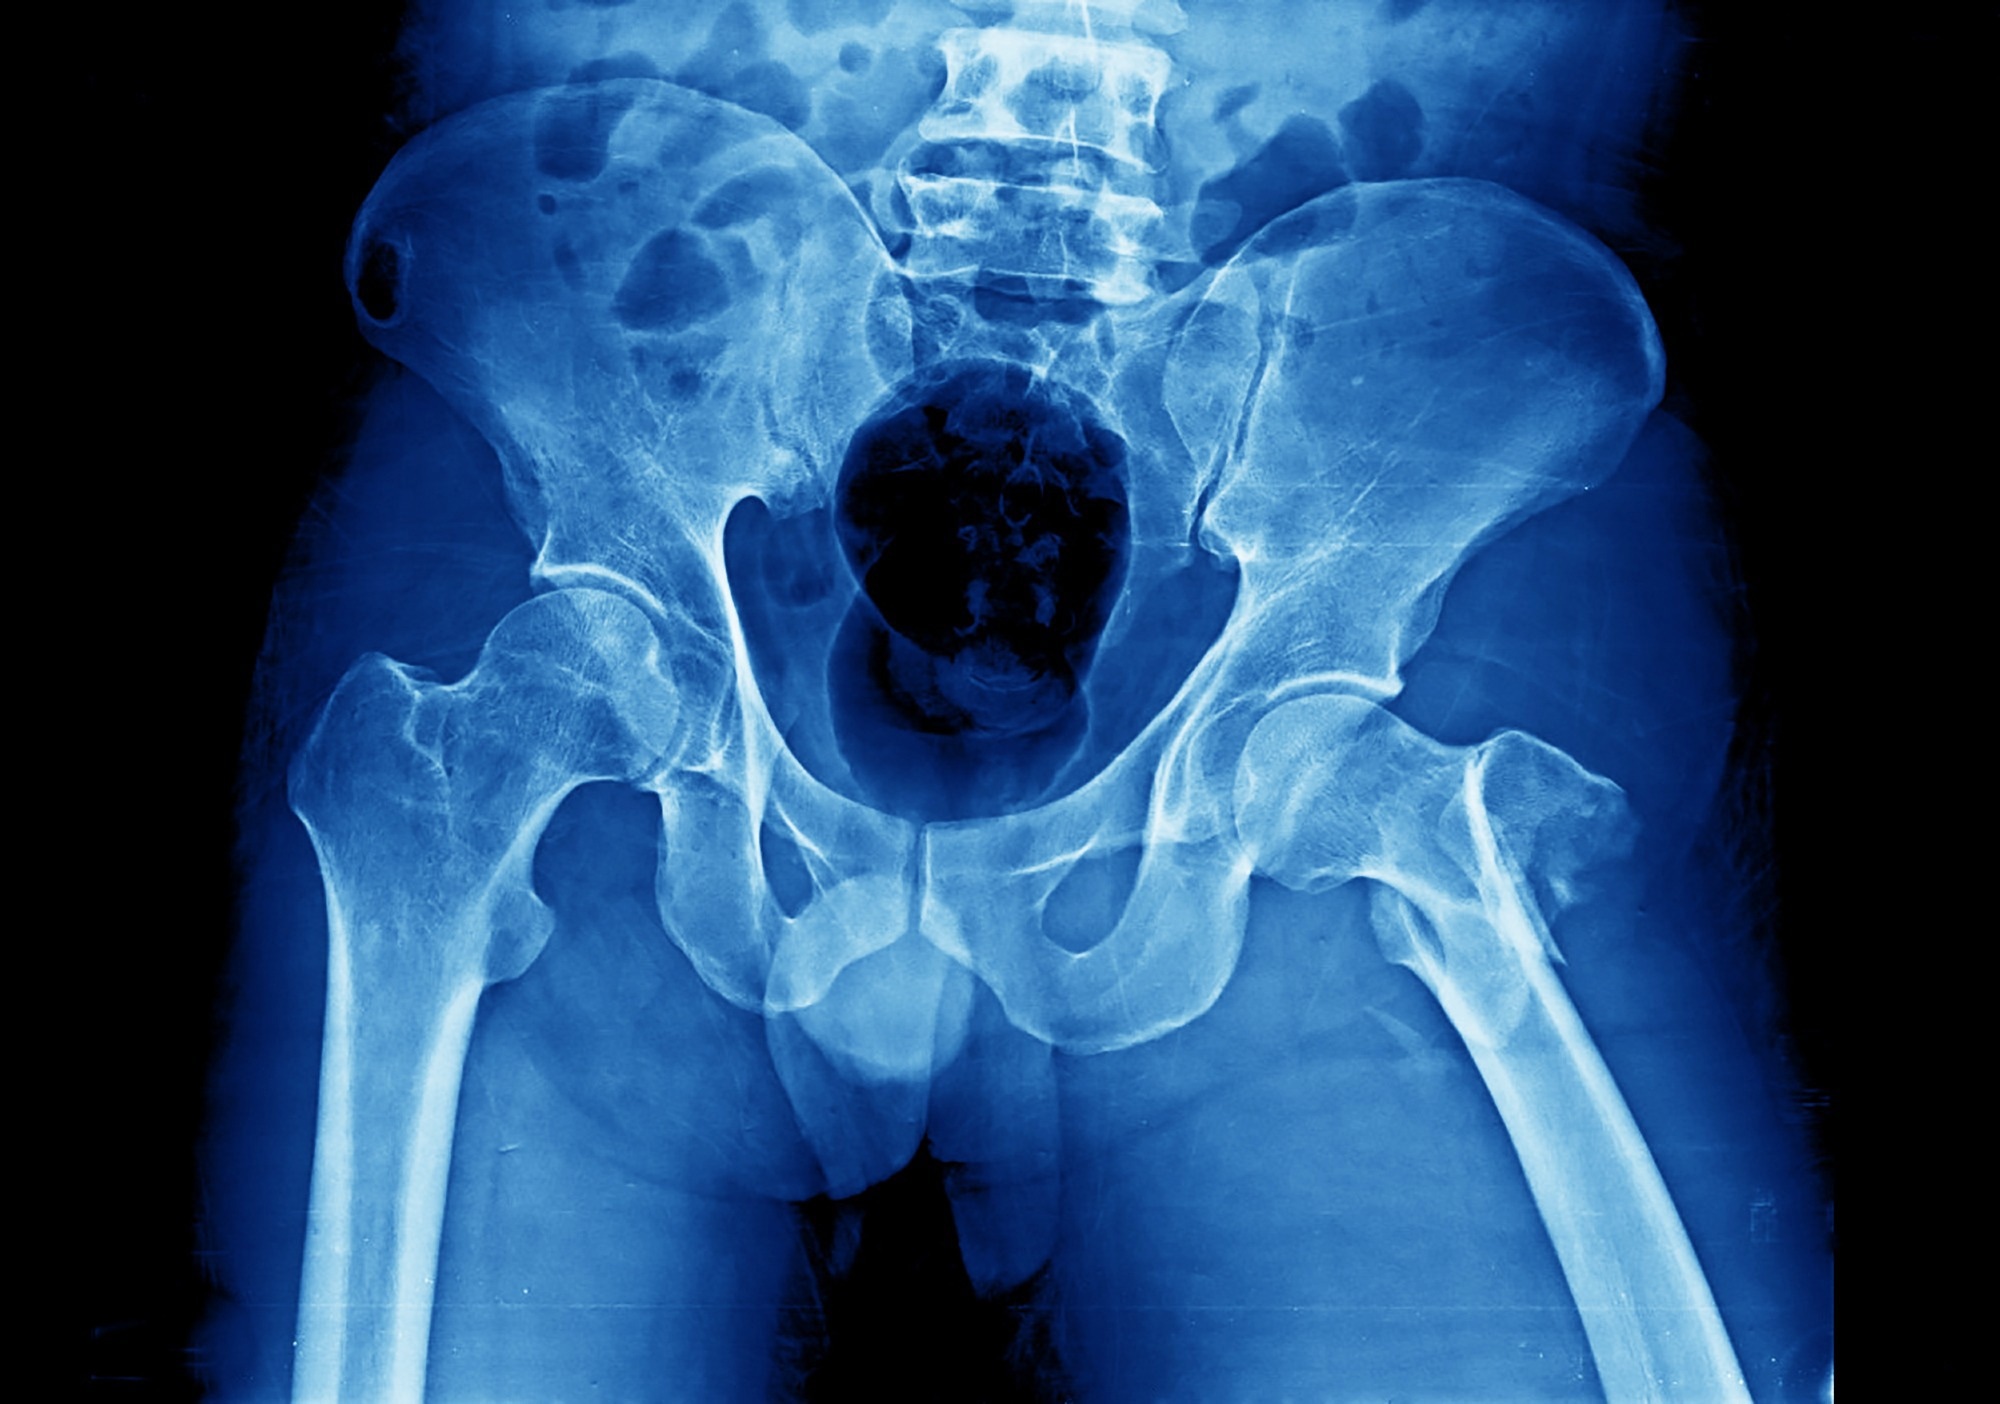 Bone breakthrough: Researchers develop ‘skeletal age’ tool to predict mortality risk after fractures